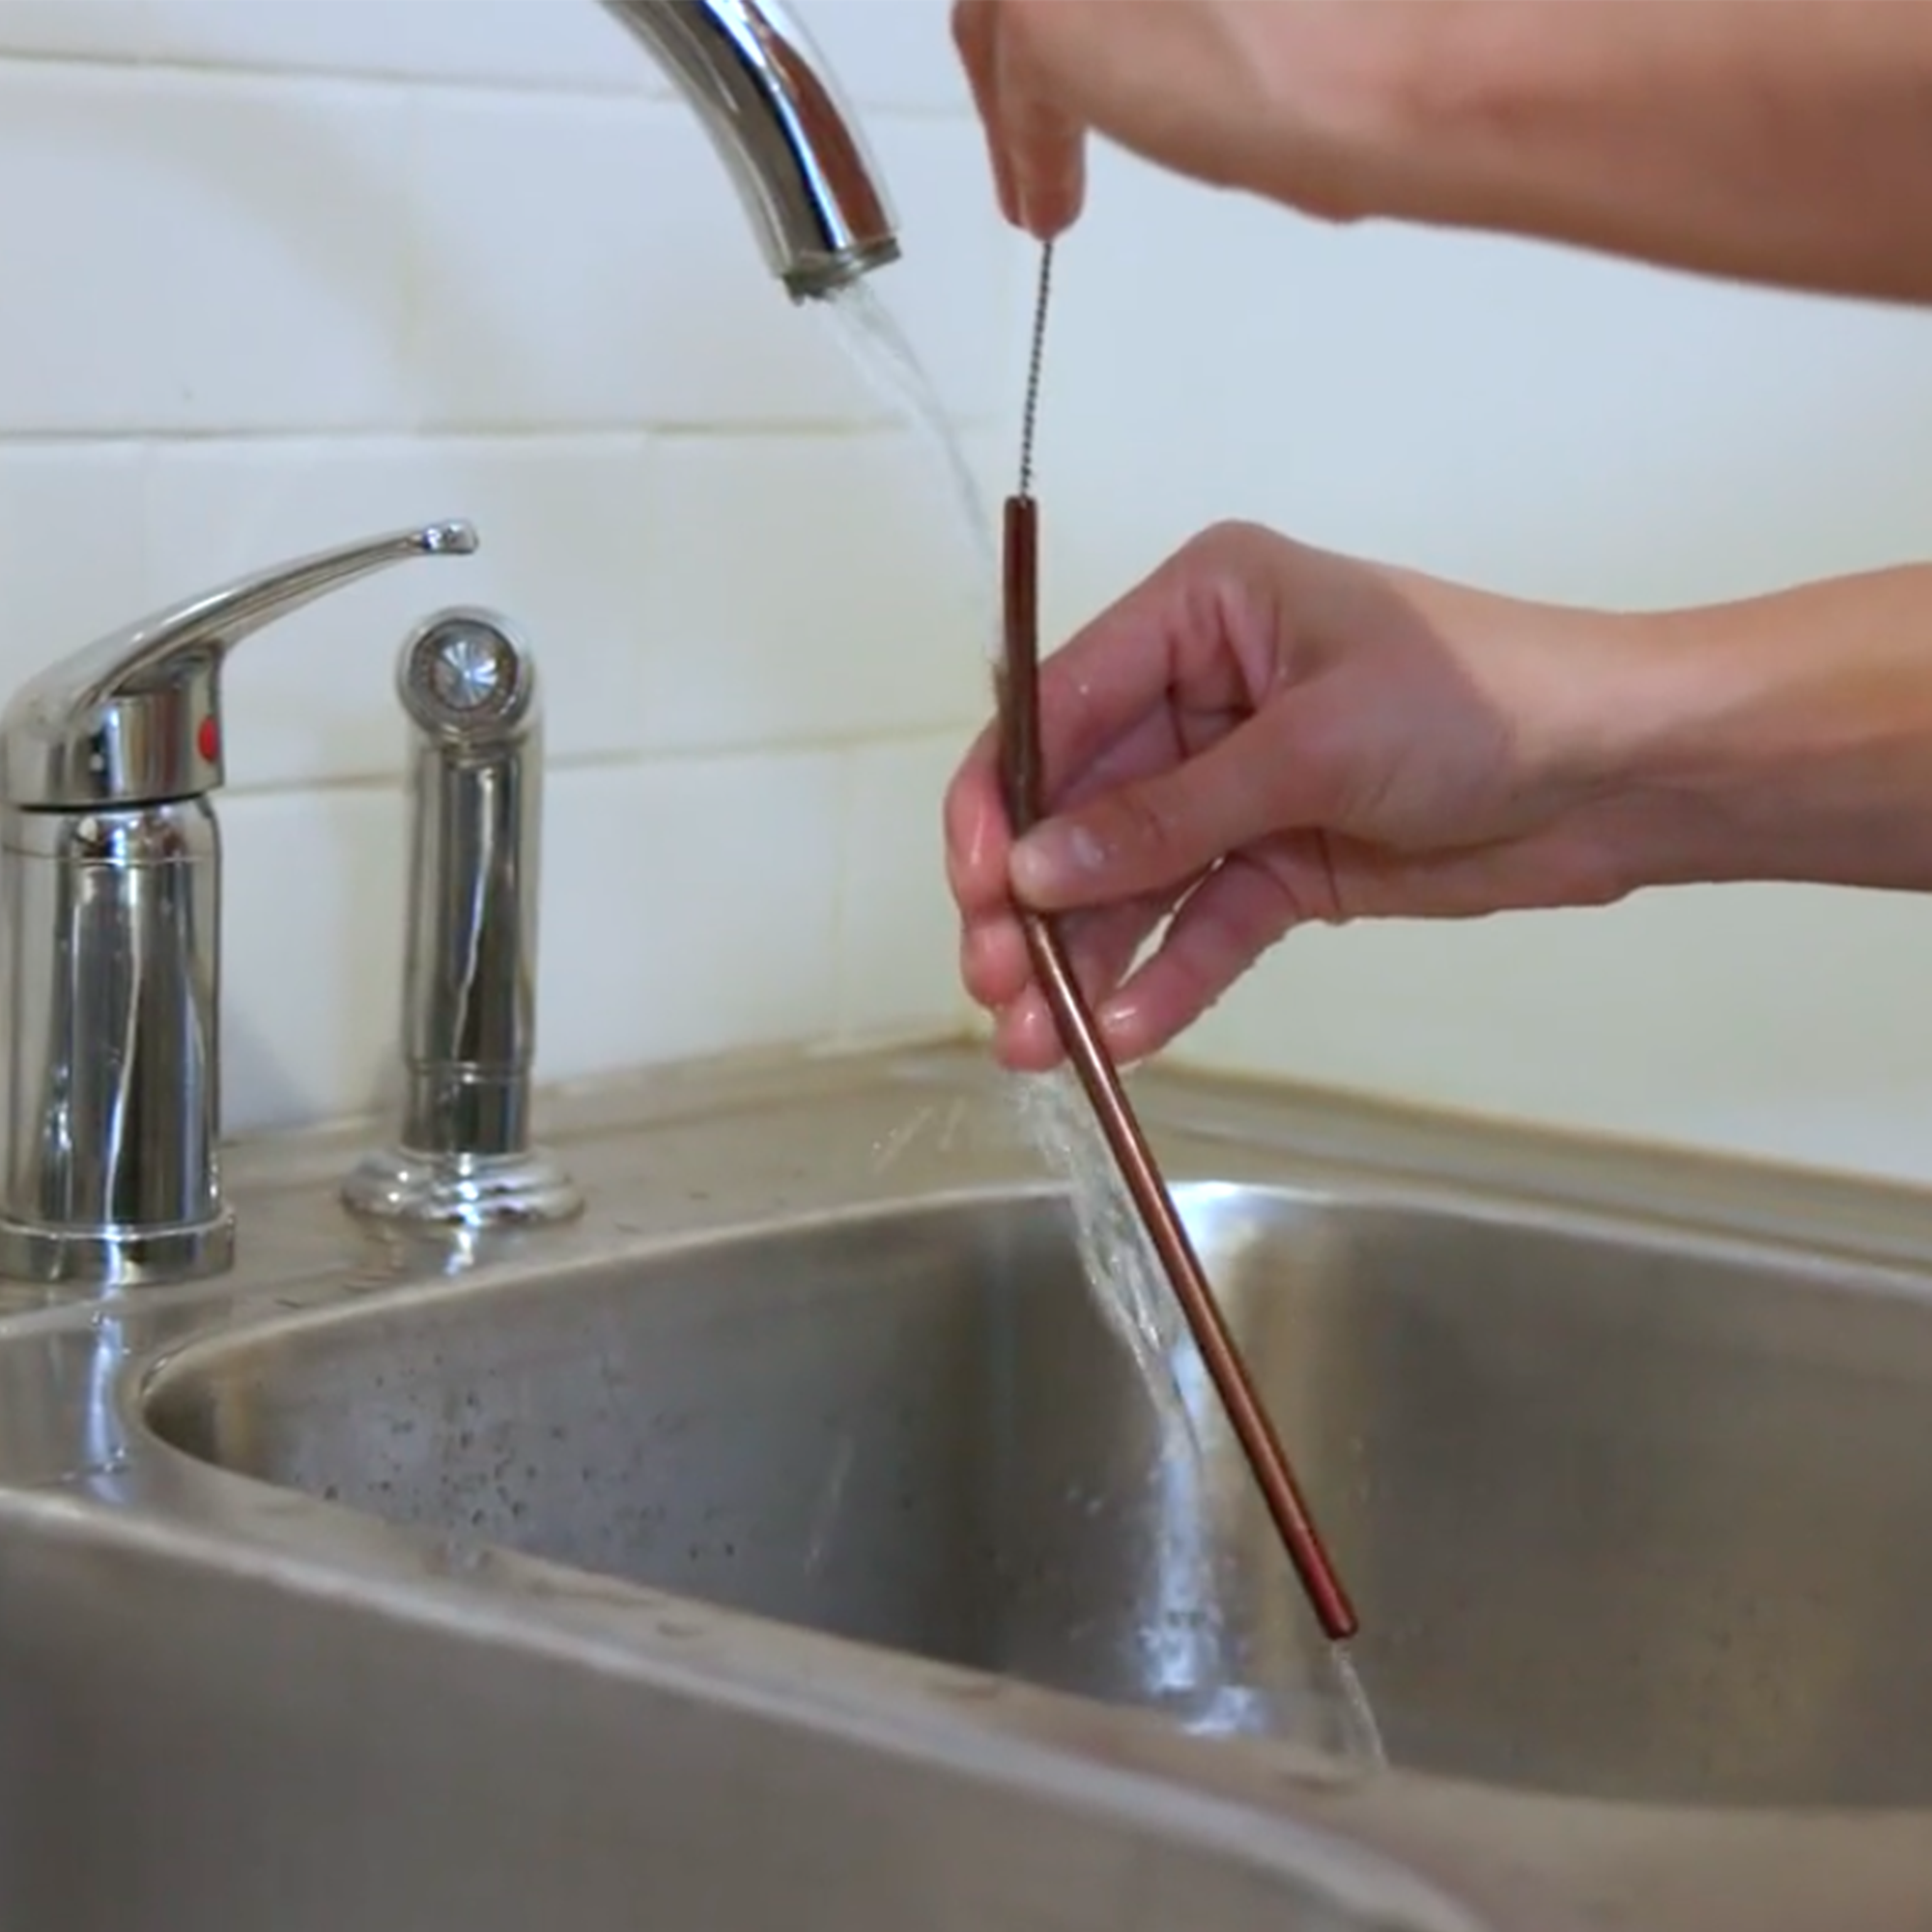 Have tiny cleaning brushes for straws? Don't lose them down the drain by  putting a key ring on the end. : r/lifehacks